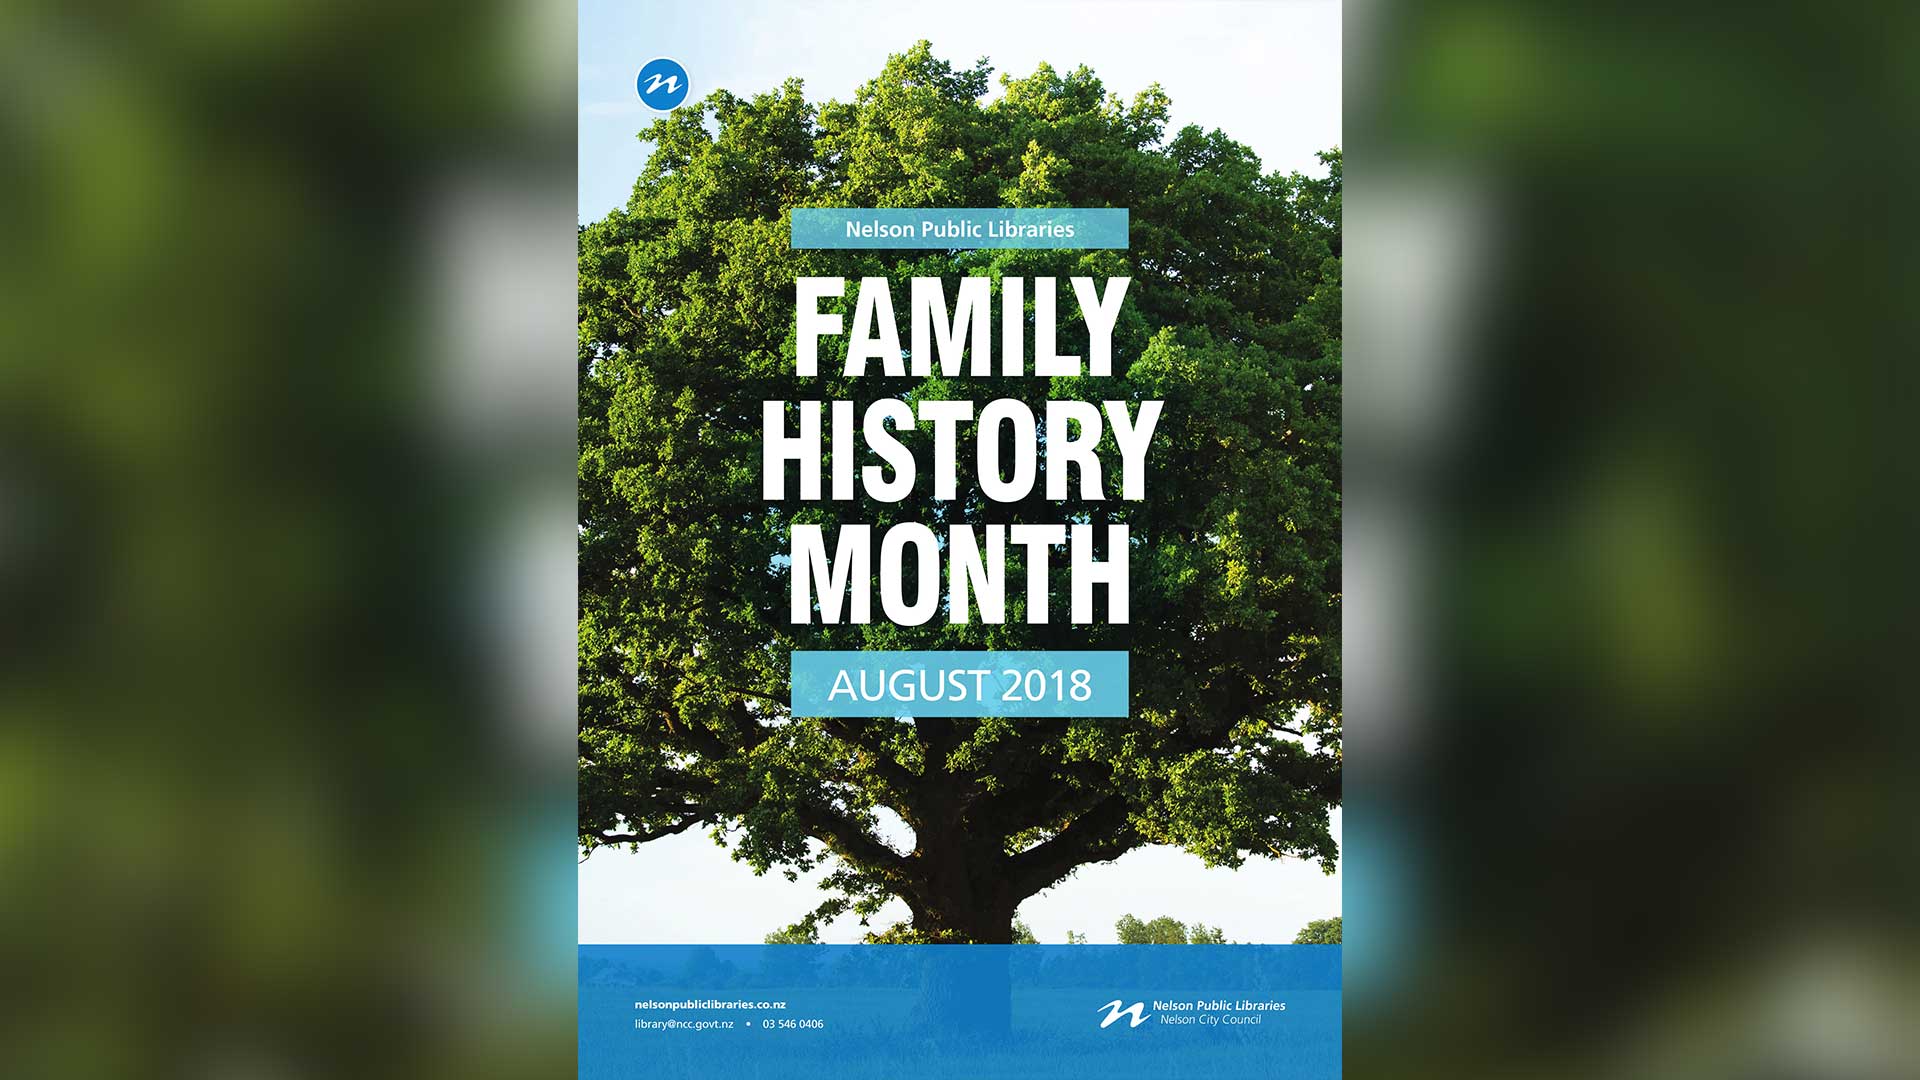 Celebrate and learn Family History Month at the Nelson Public